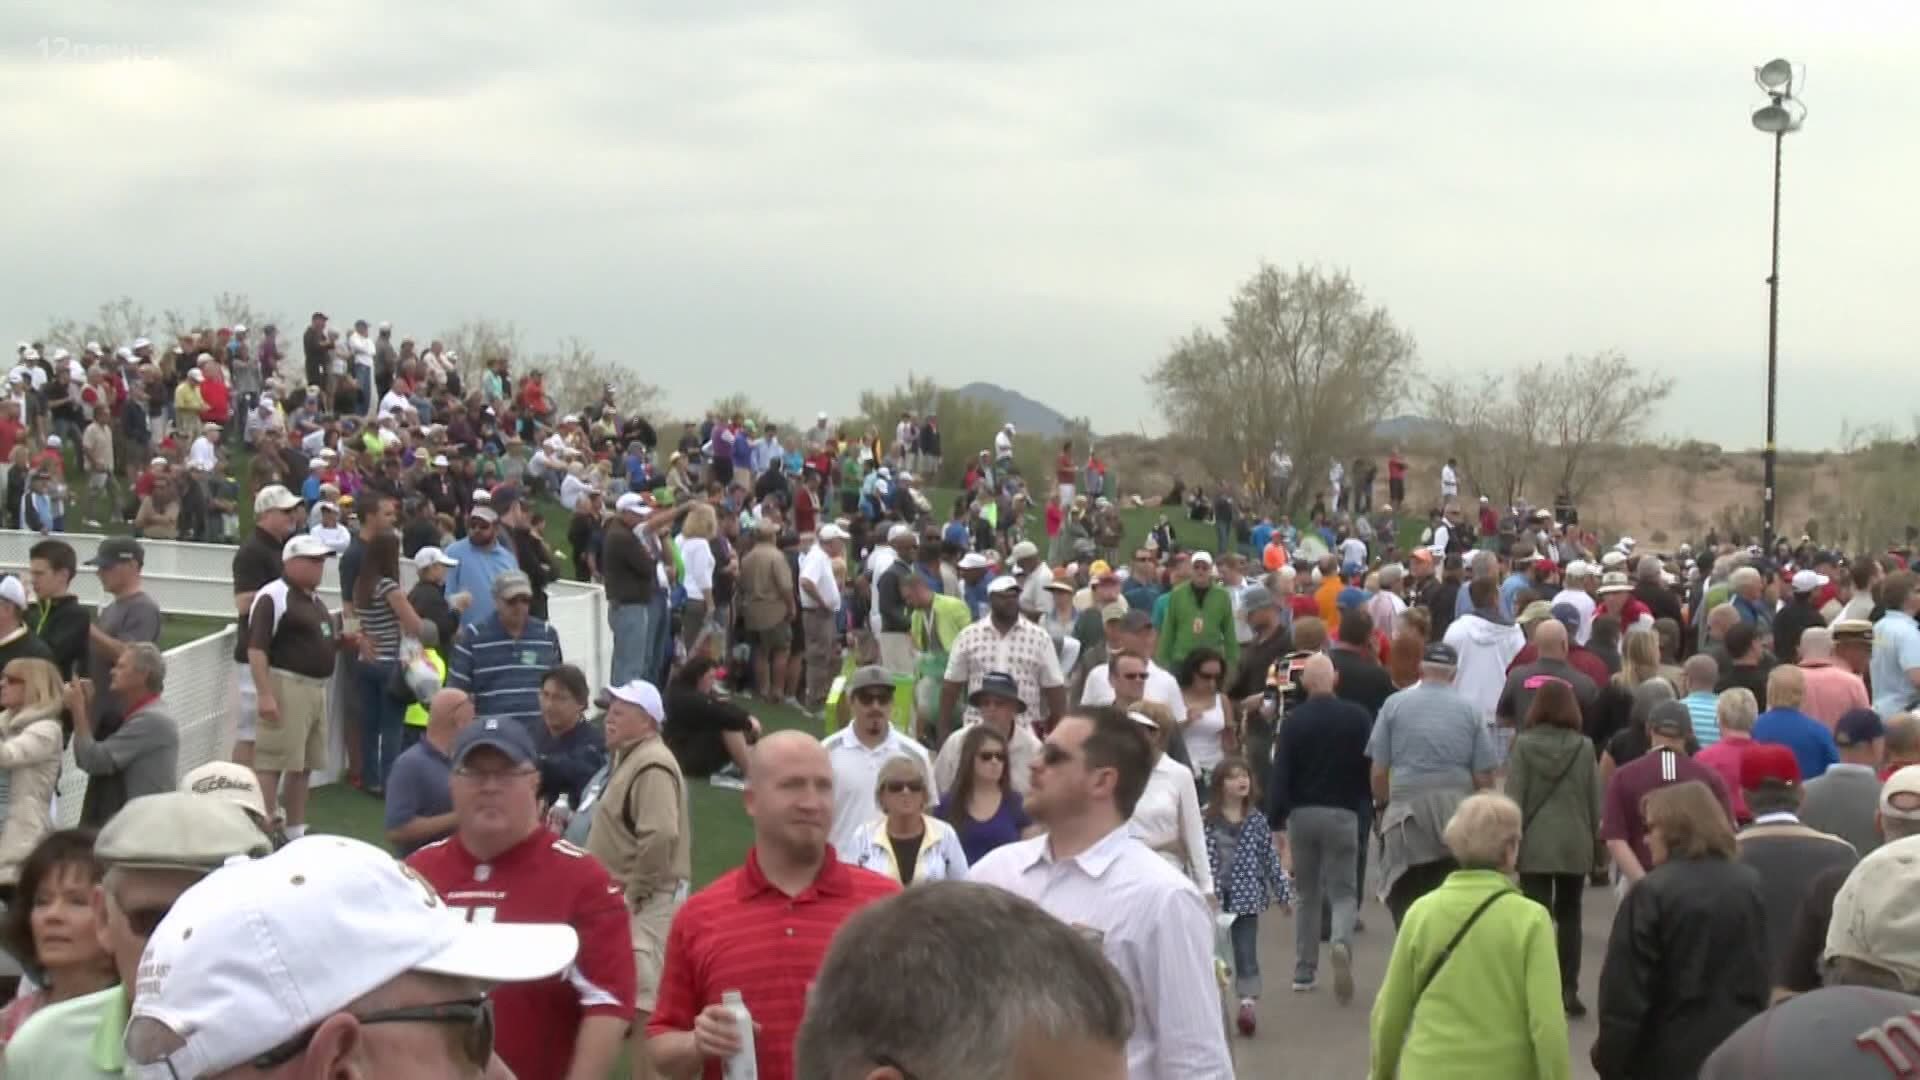 The Waste Management Phoenix Open is set to kick off with COVID-19 changes in place to keep spectators safe.